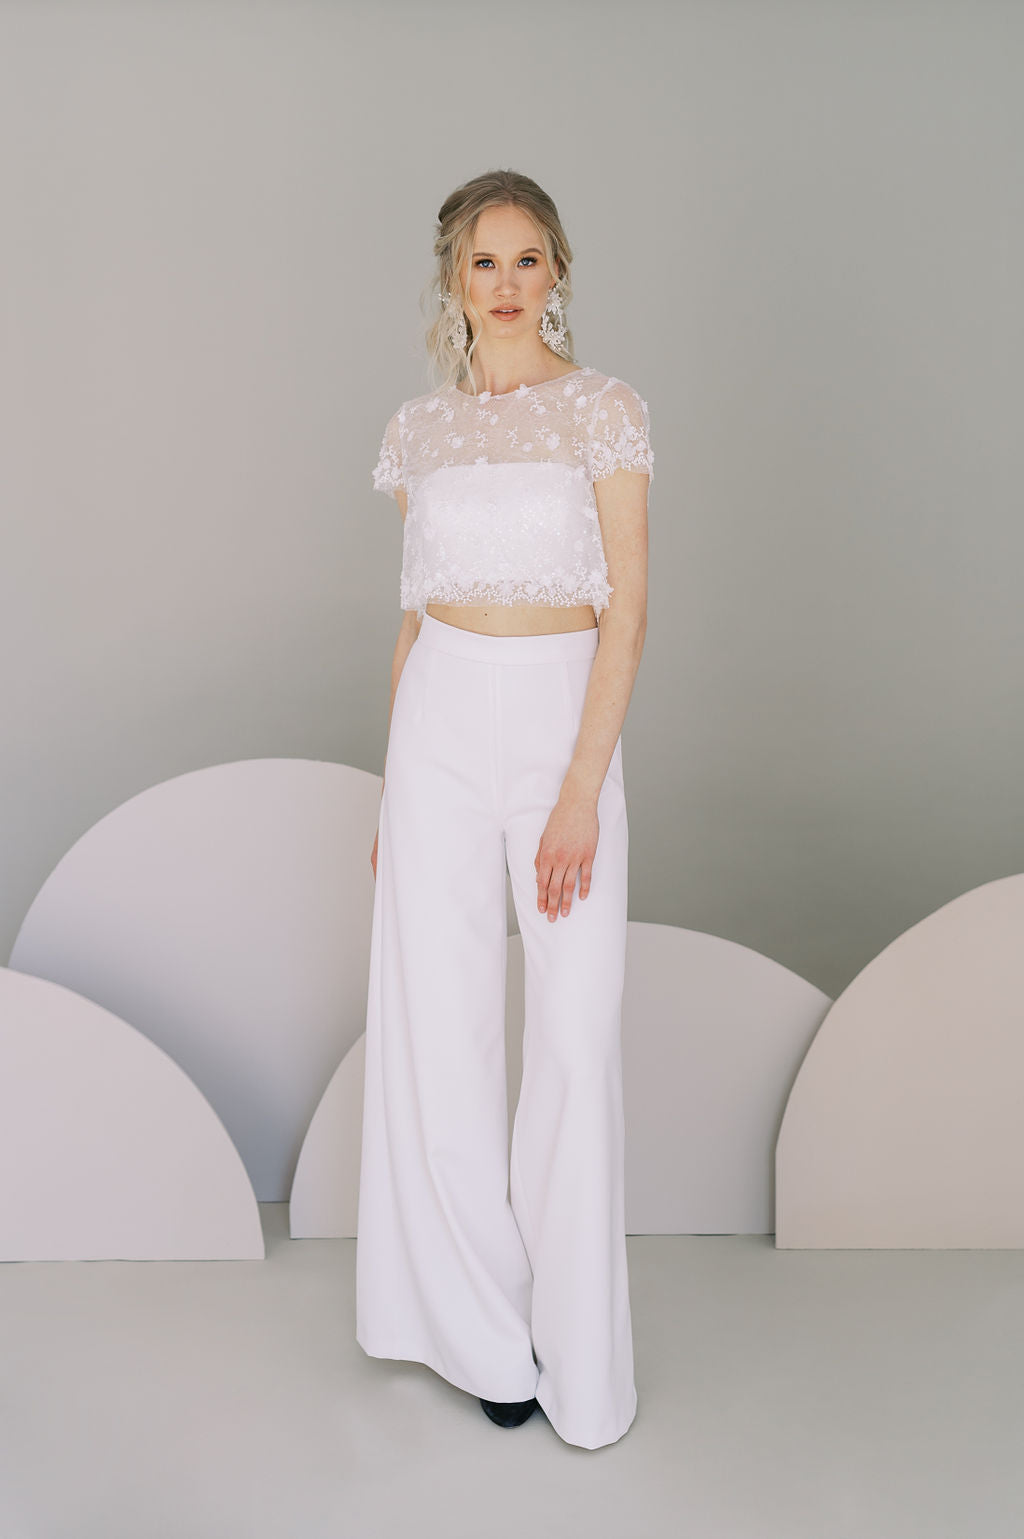 Cool bride wedding pants for a casual bridal outfit. Stretch crepe palazzo trousers with a tapered fit at the waist. Designed by Catherine Langlois, Canada.